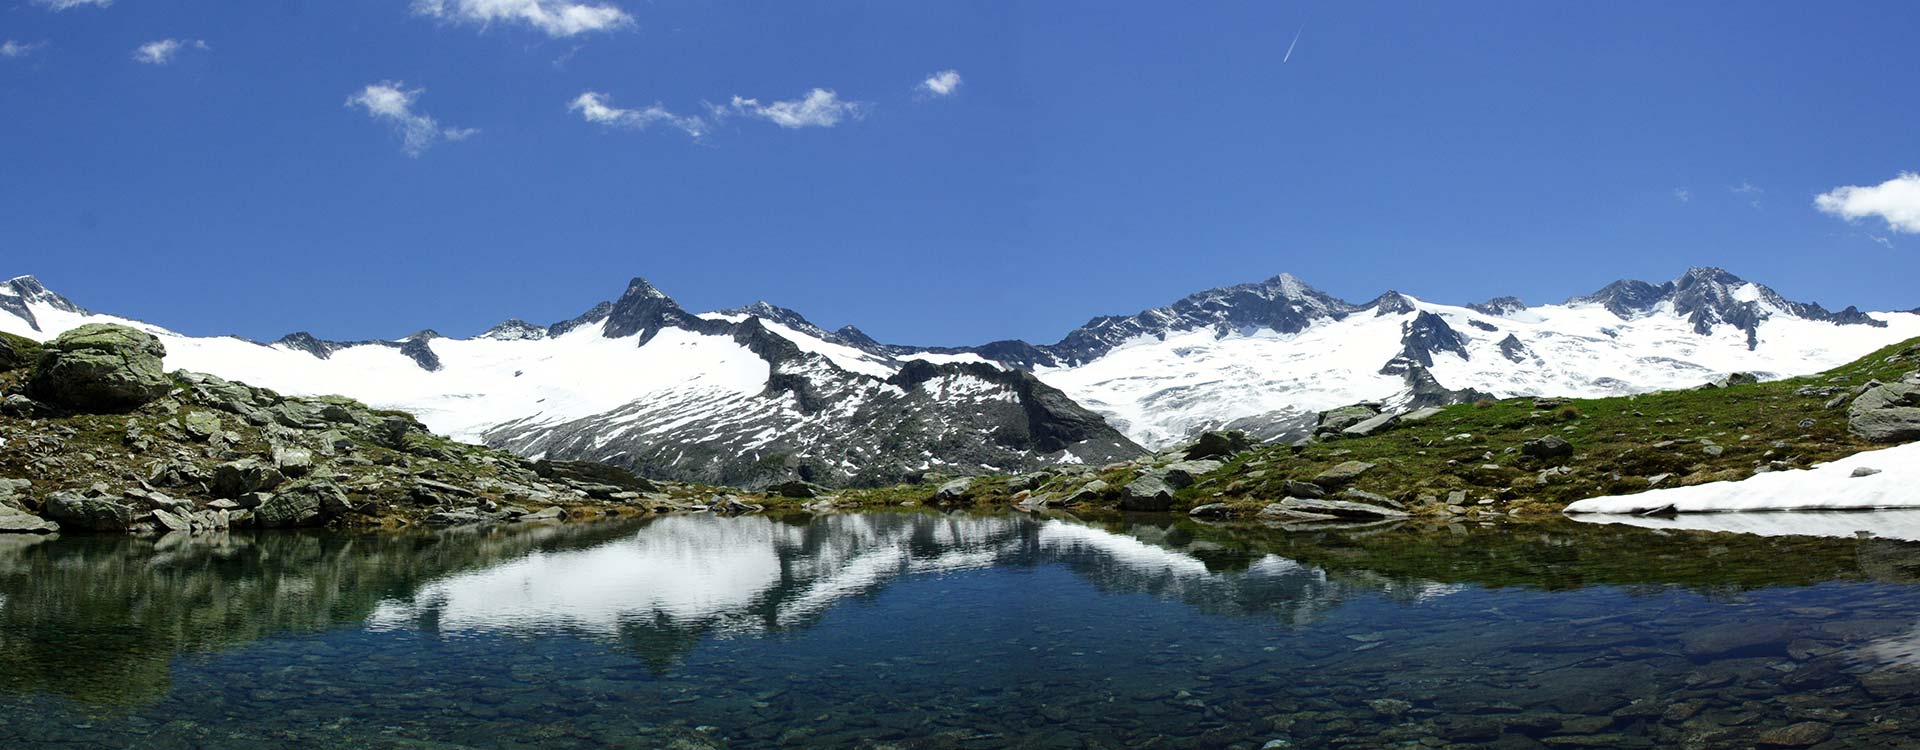 crystal clear Mountain Lakes at the Foot of glaciated Peaks